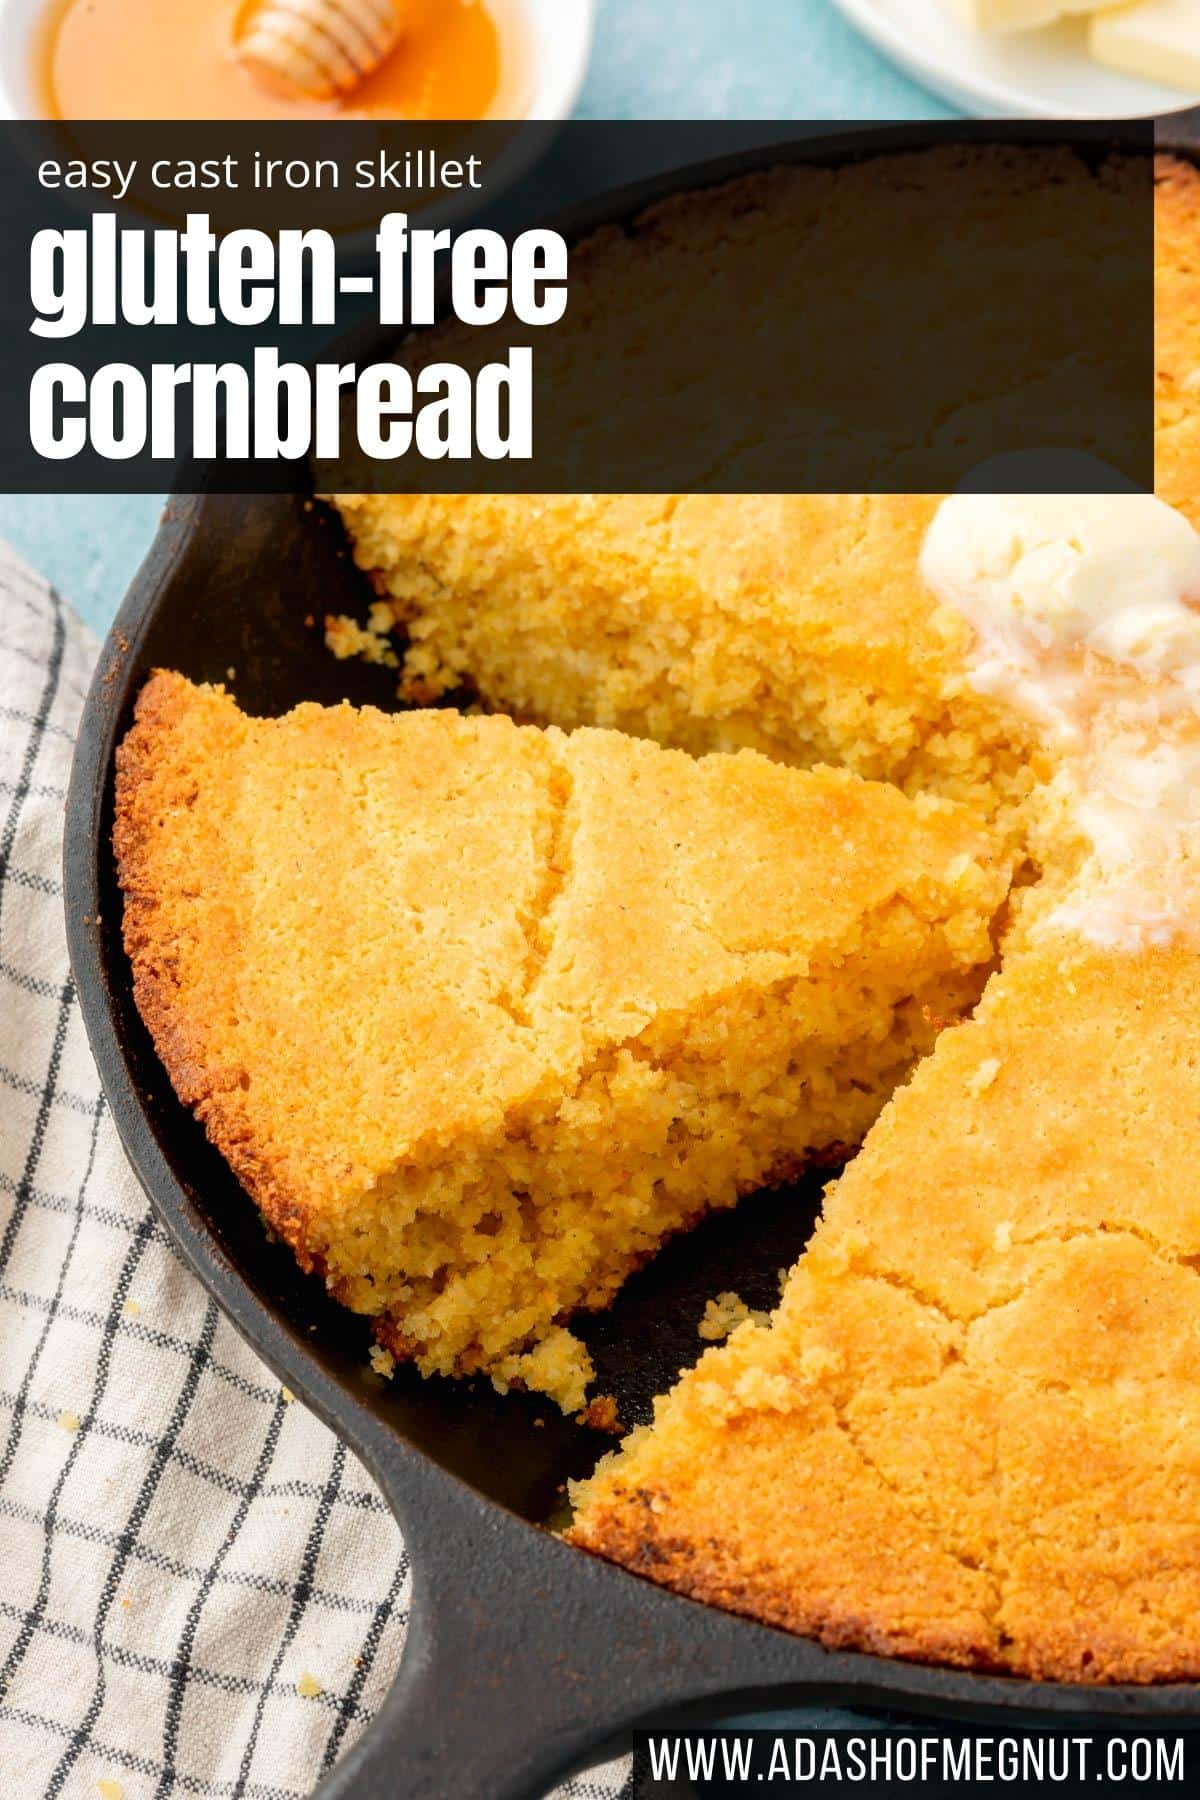 A slice of gluten-free cornbread in a cast iron skillet that has been cut away from the remaining whole cornbread.